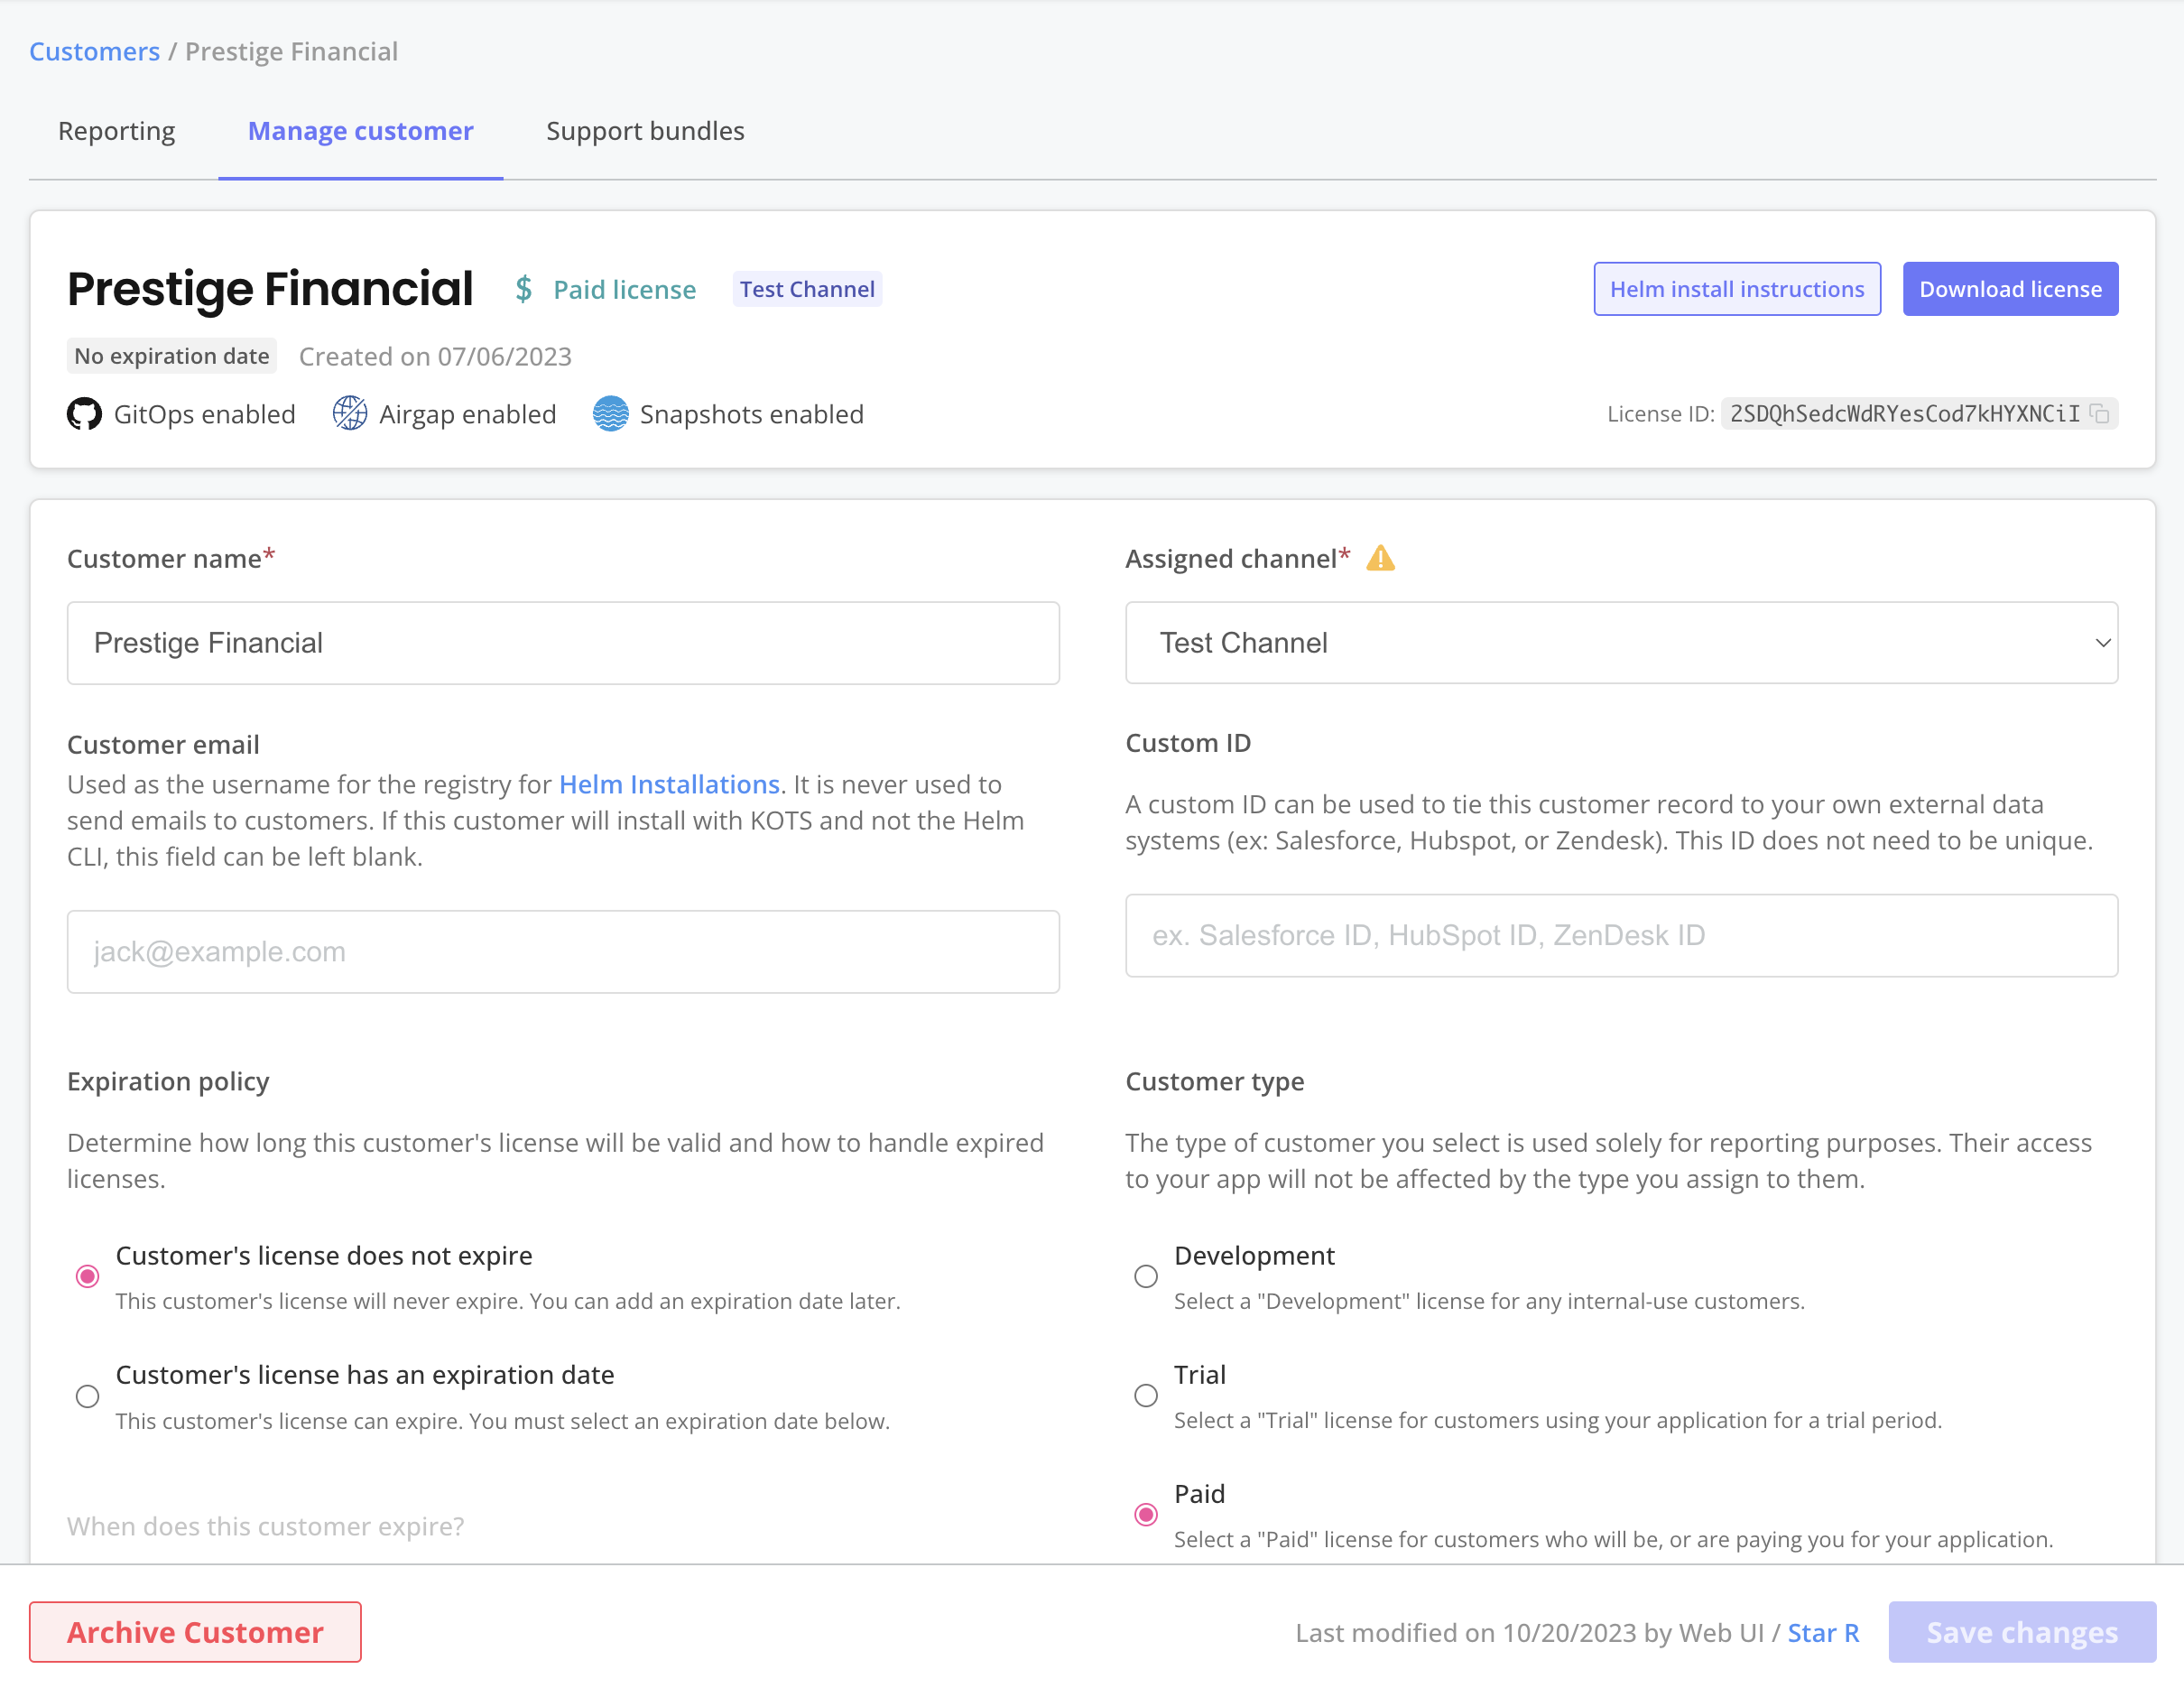 Full manage customer page for a customer named Prestige Financial